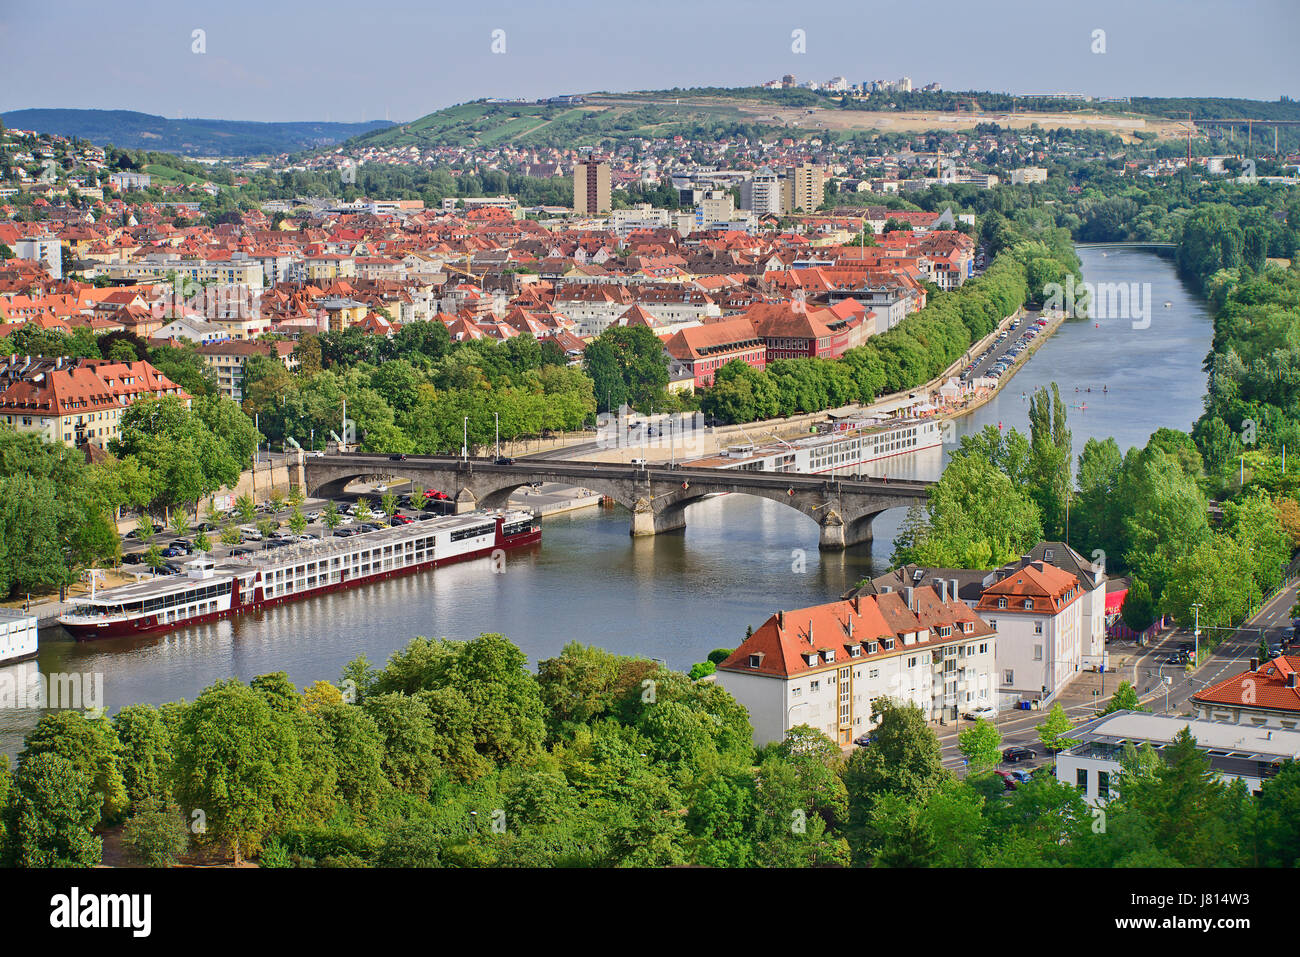 Germany, Bavaria, Wurzburg, View eastwards from Festung Marienburg fortress over the River Main with cruise boats. Stock Photo